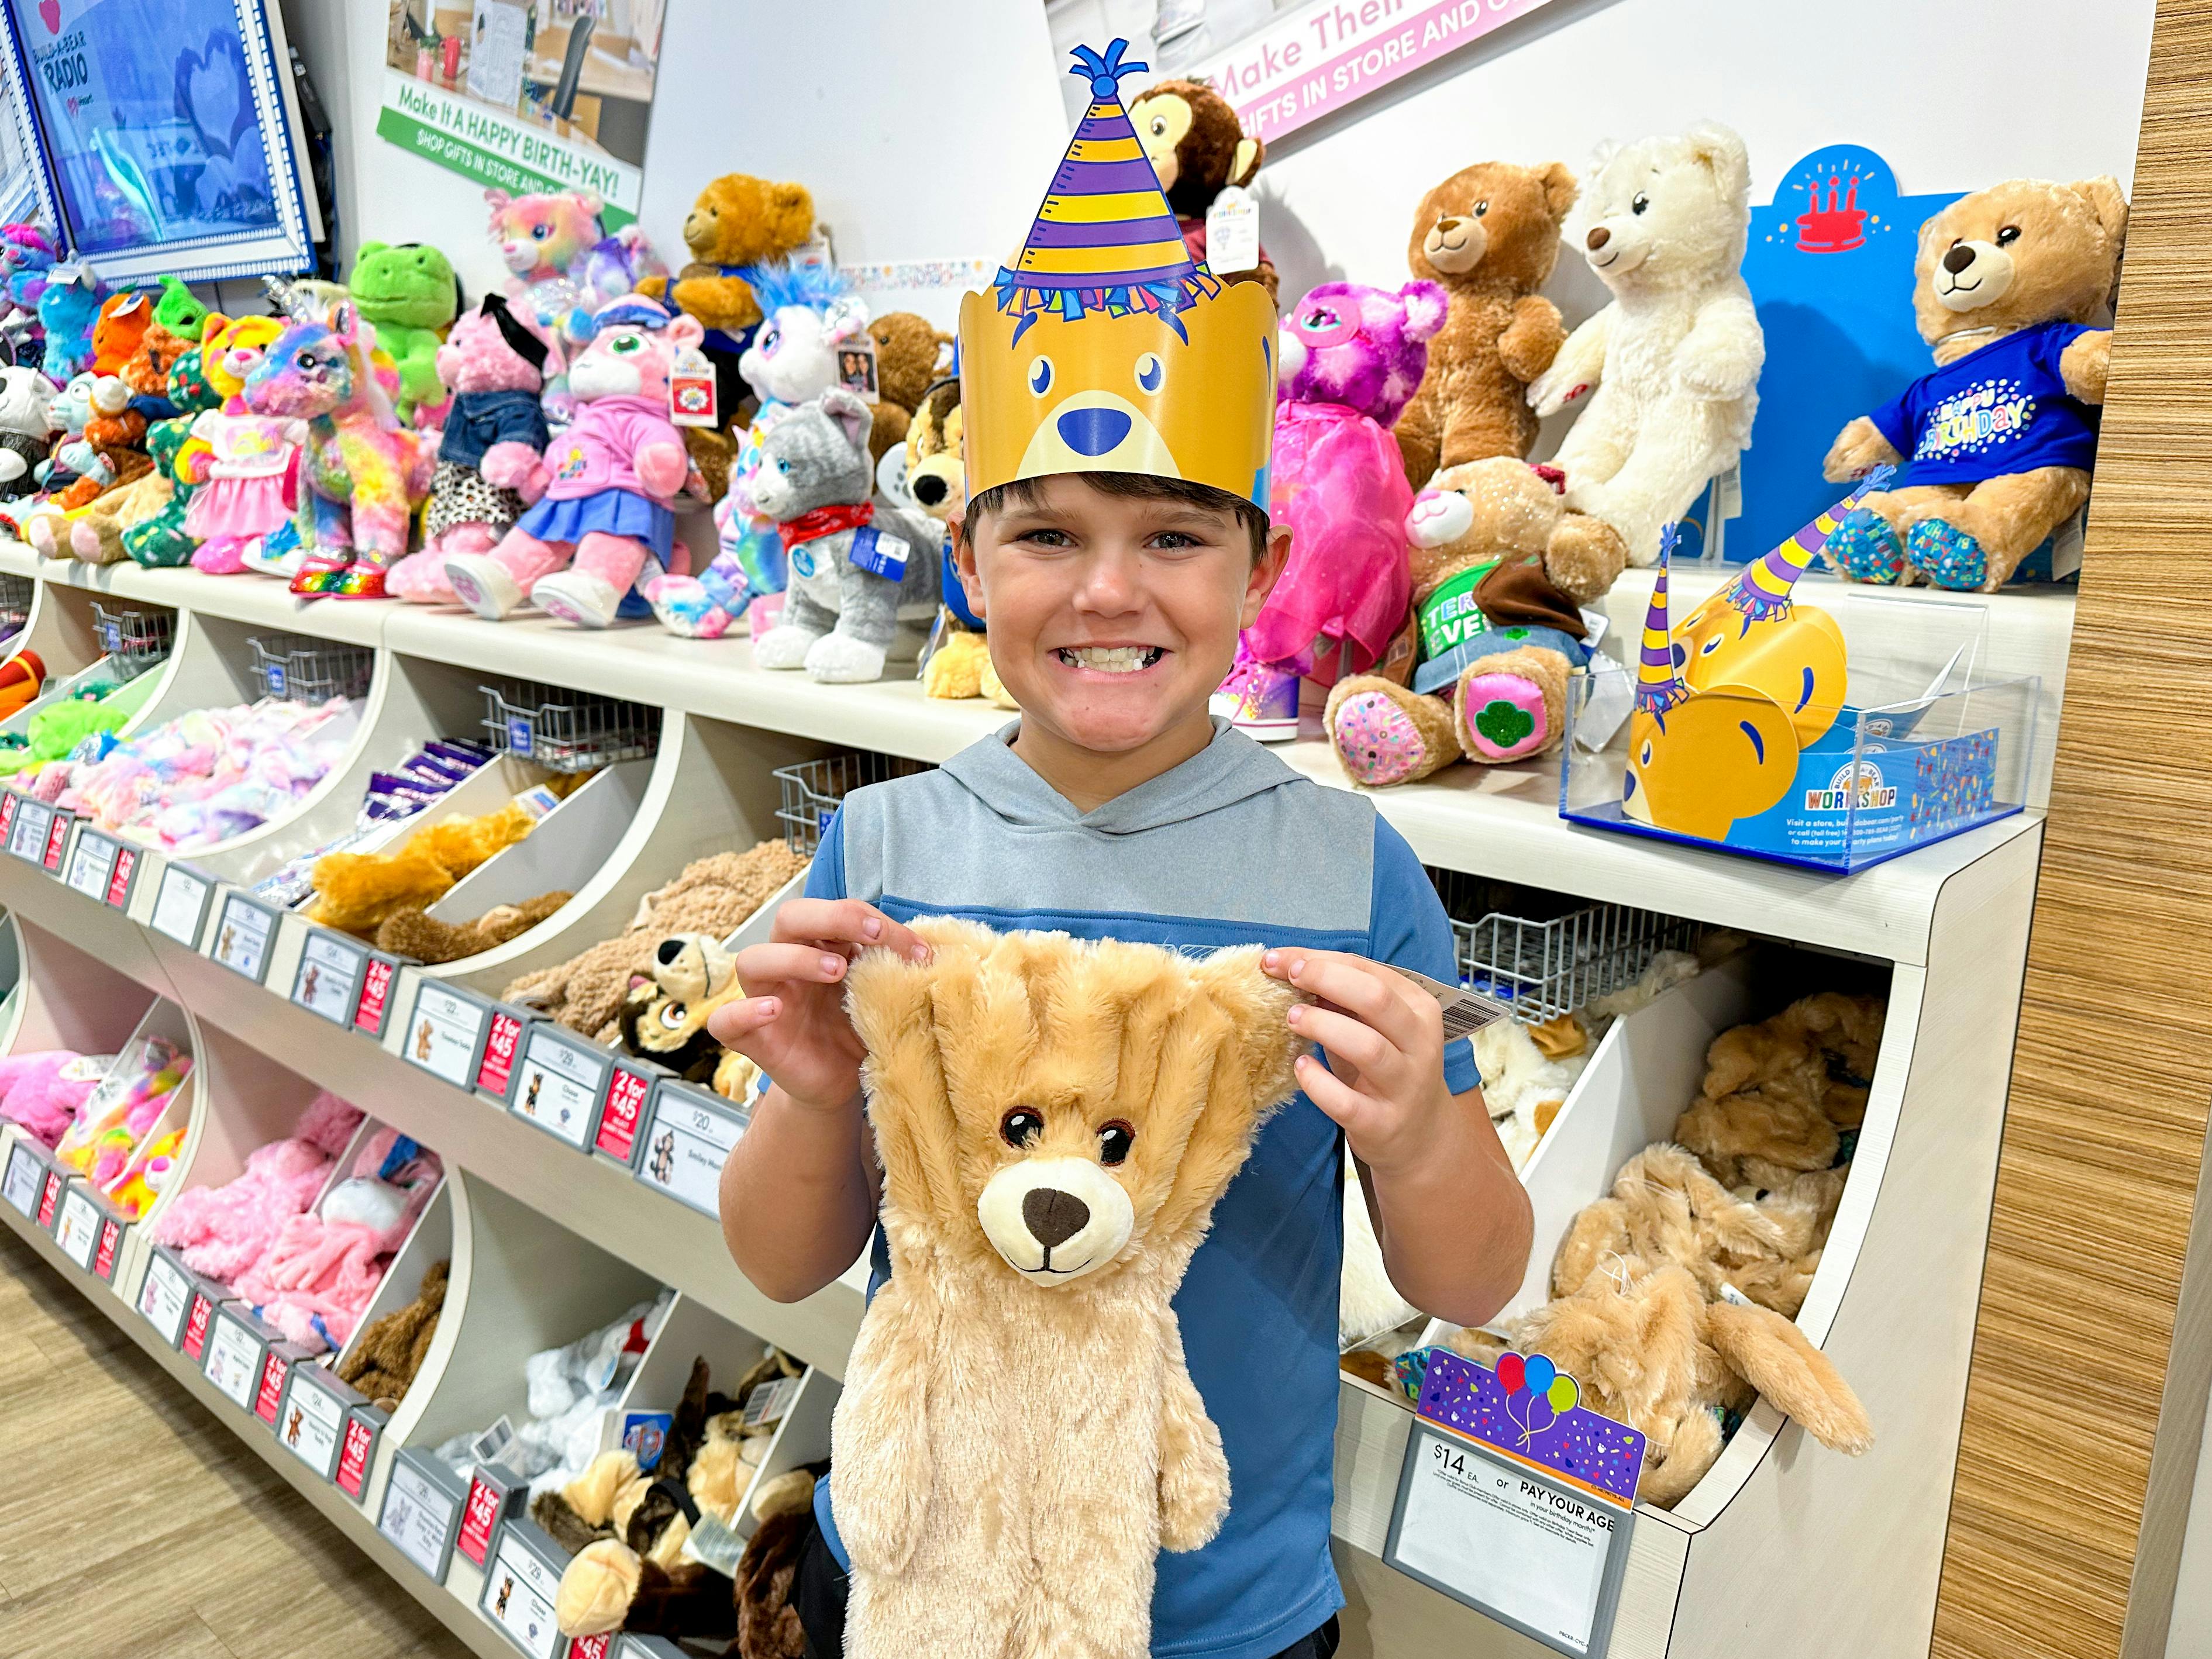 Build-a-Bear Pay Your Age: Here's How It Works - The Krazy Coupon Lady